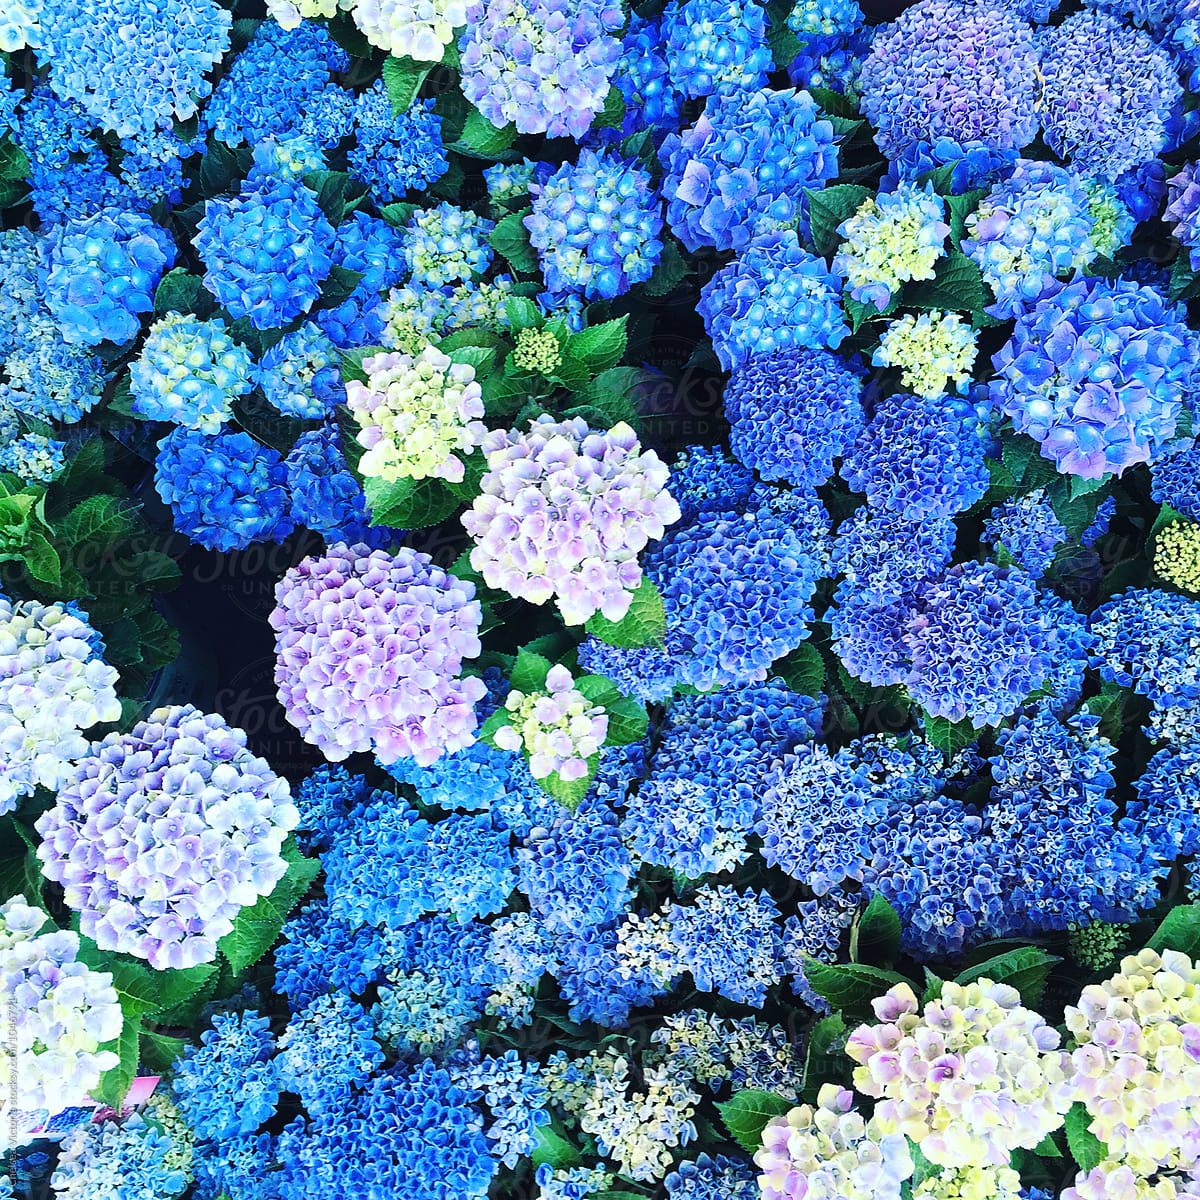 Blue and green hydrangea at a flower market